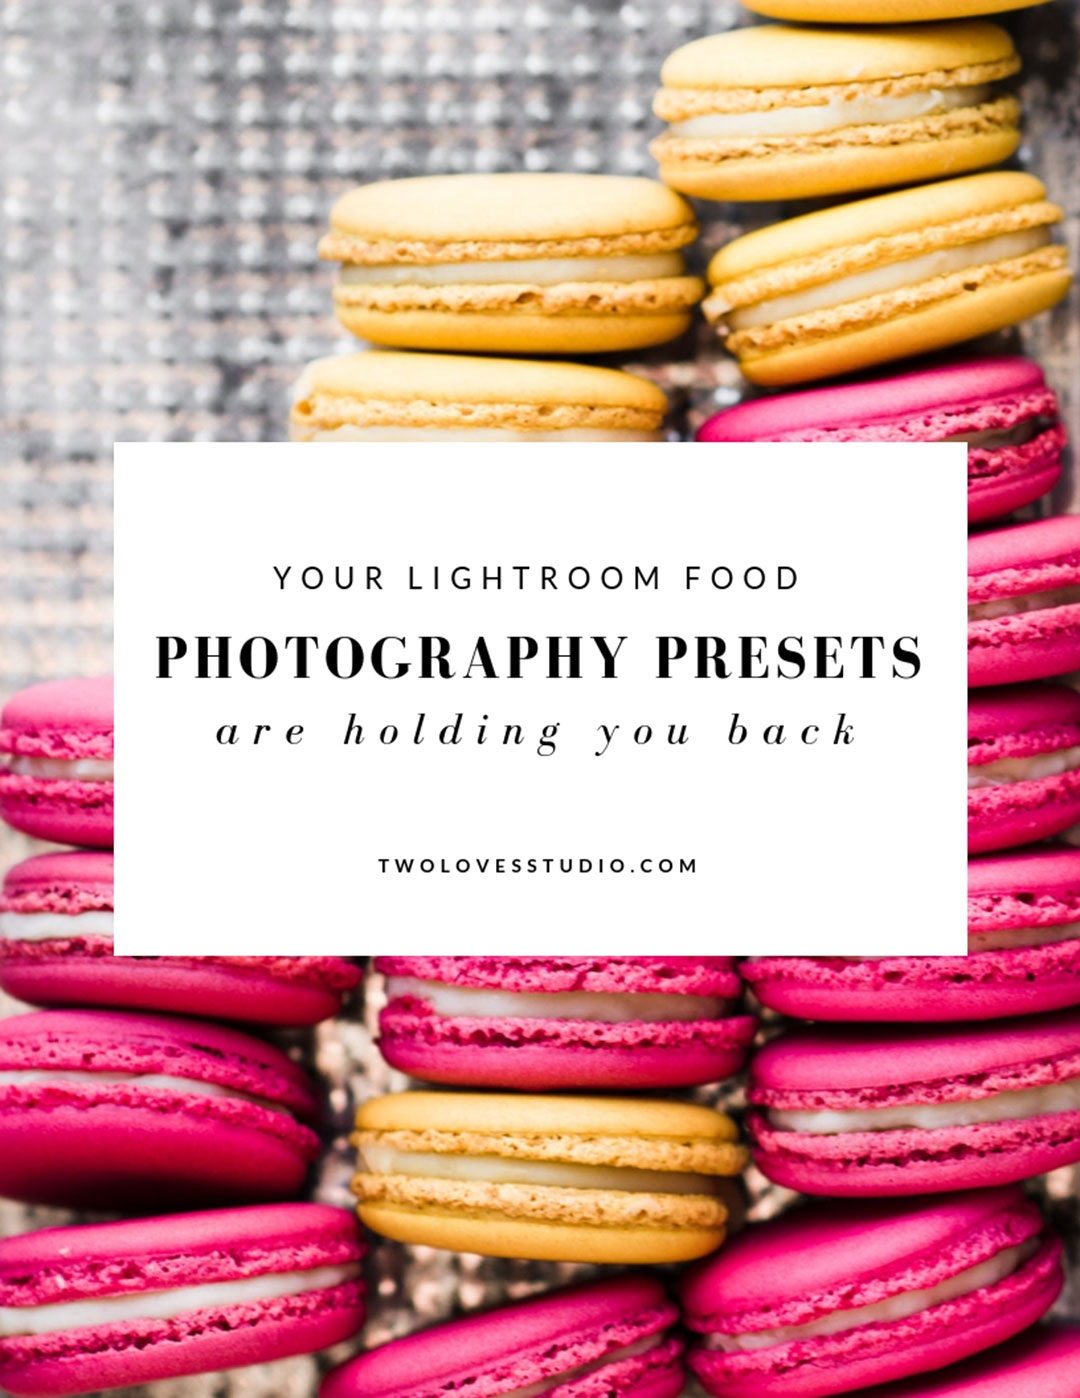 There are so many reasons why Lightroom food photography presets are great. But if you don’t know how to use them, or simply buy them to save time, then they could be holding you back. Click to find out why.